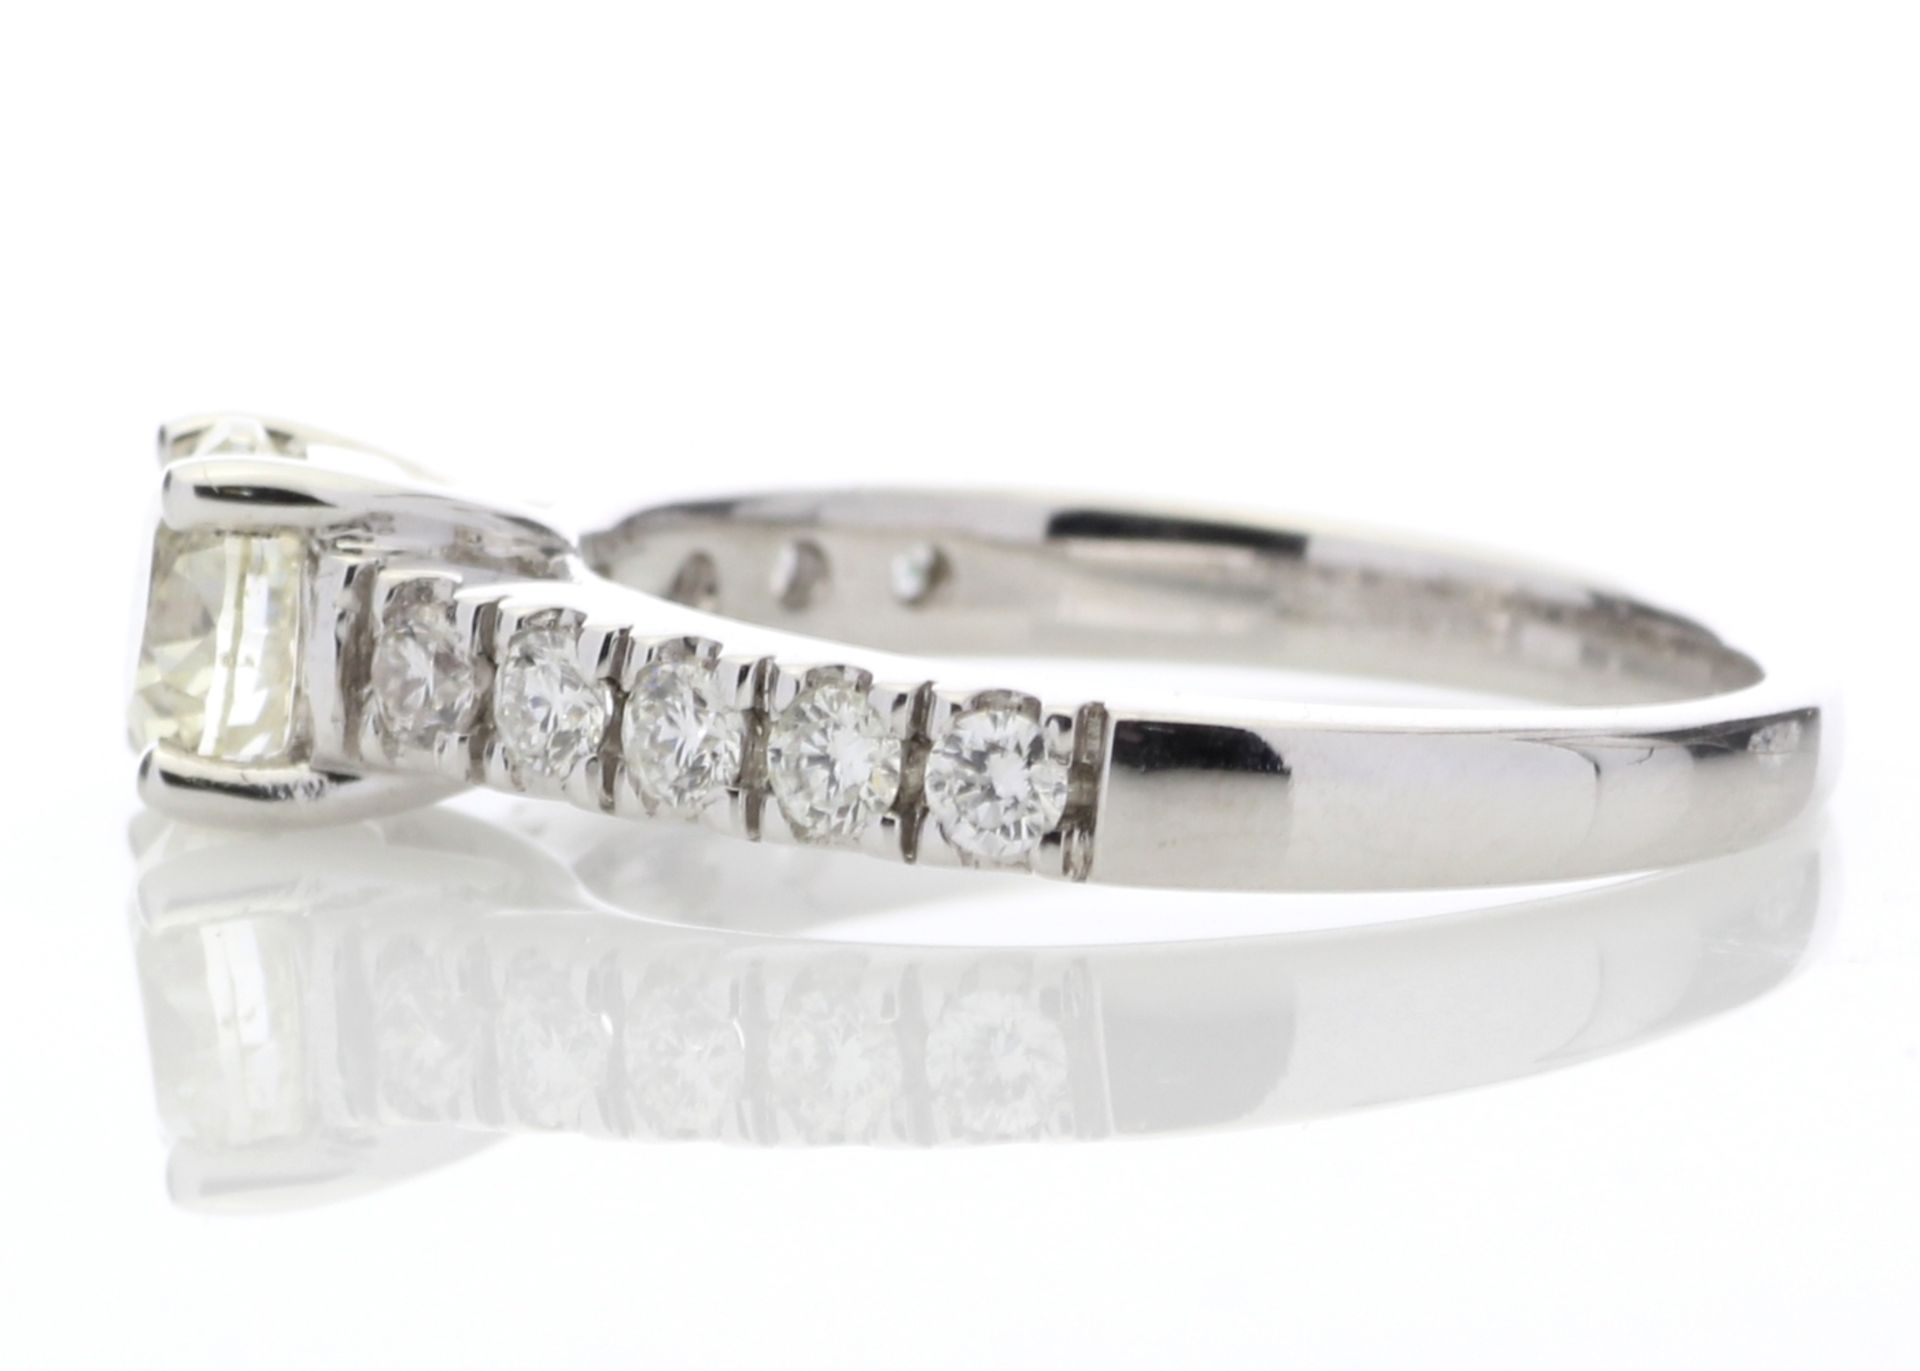 18ct White Gold Single Stone Claw Set With Stone Set Shoulders Diamond Ring 0.61 Carats - Valued - Image 3 of 5